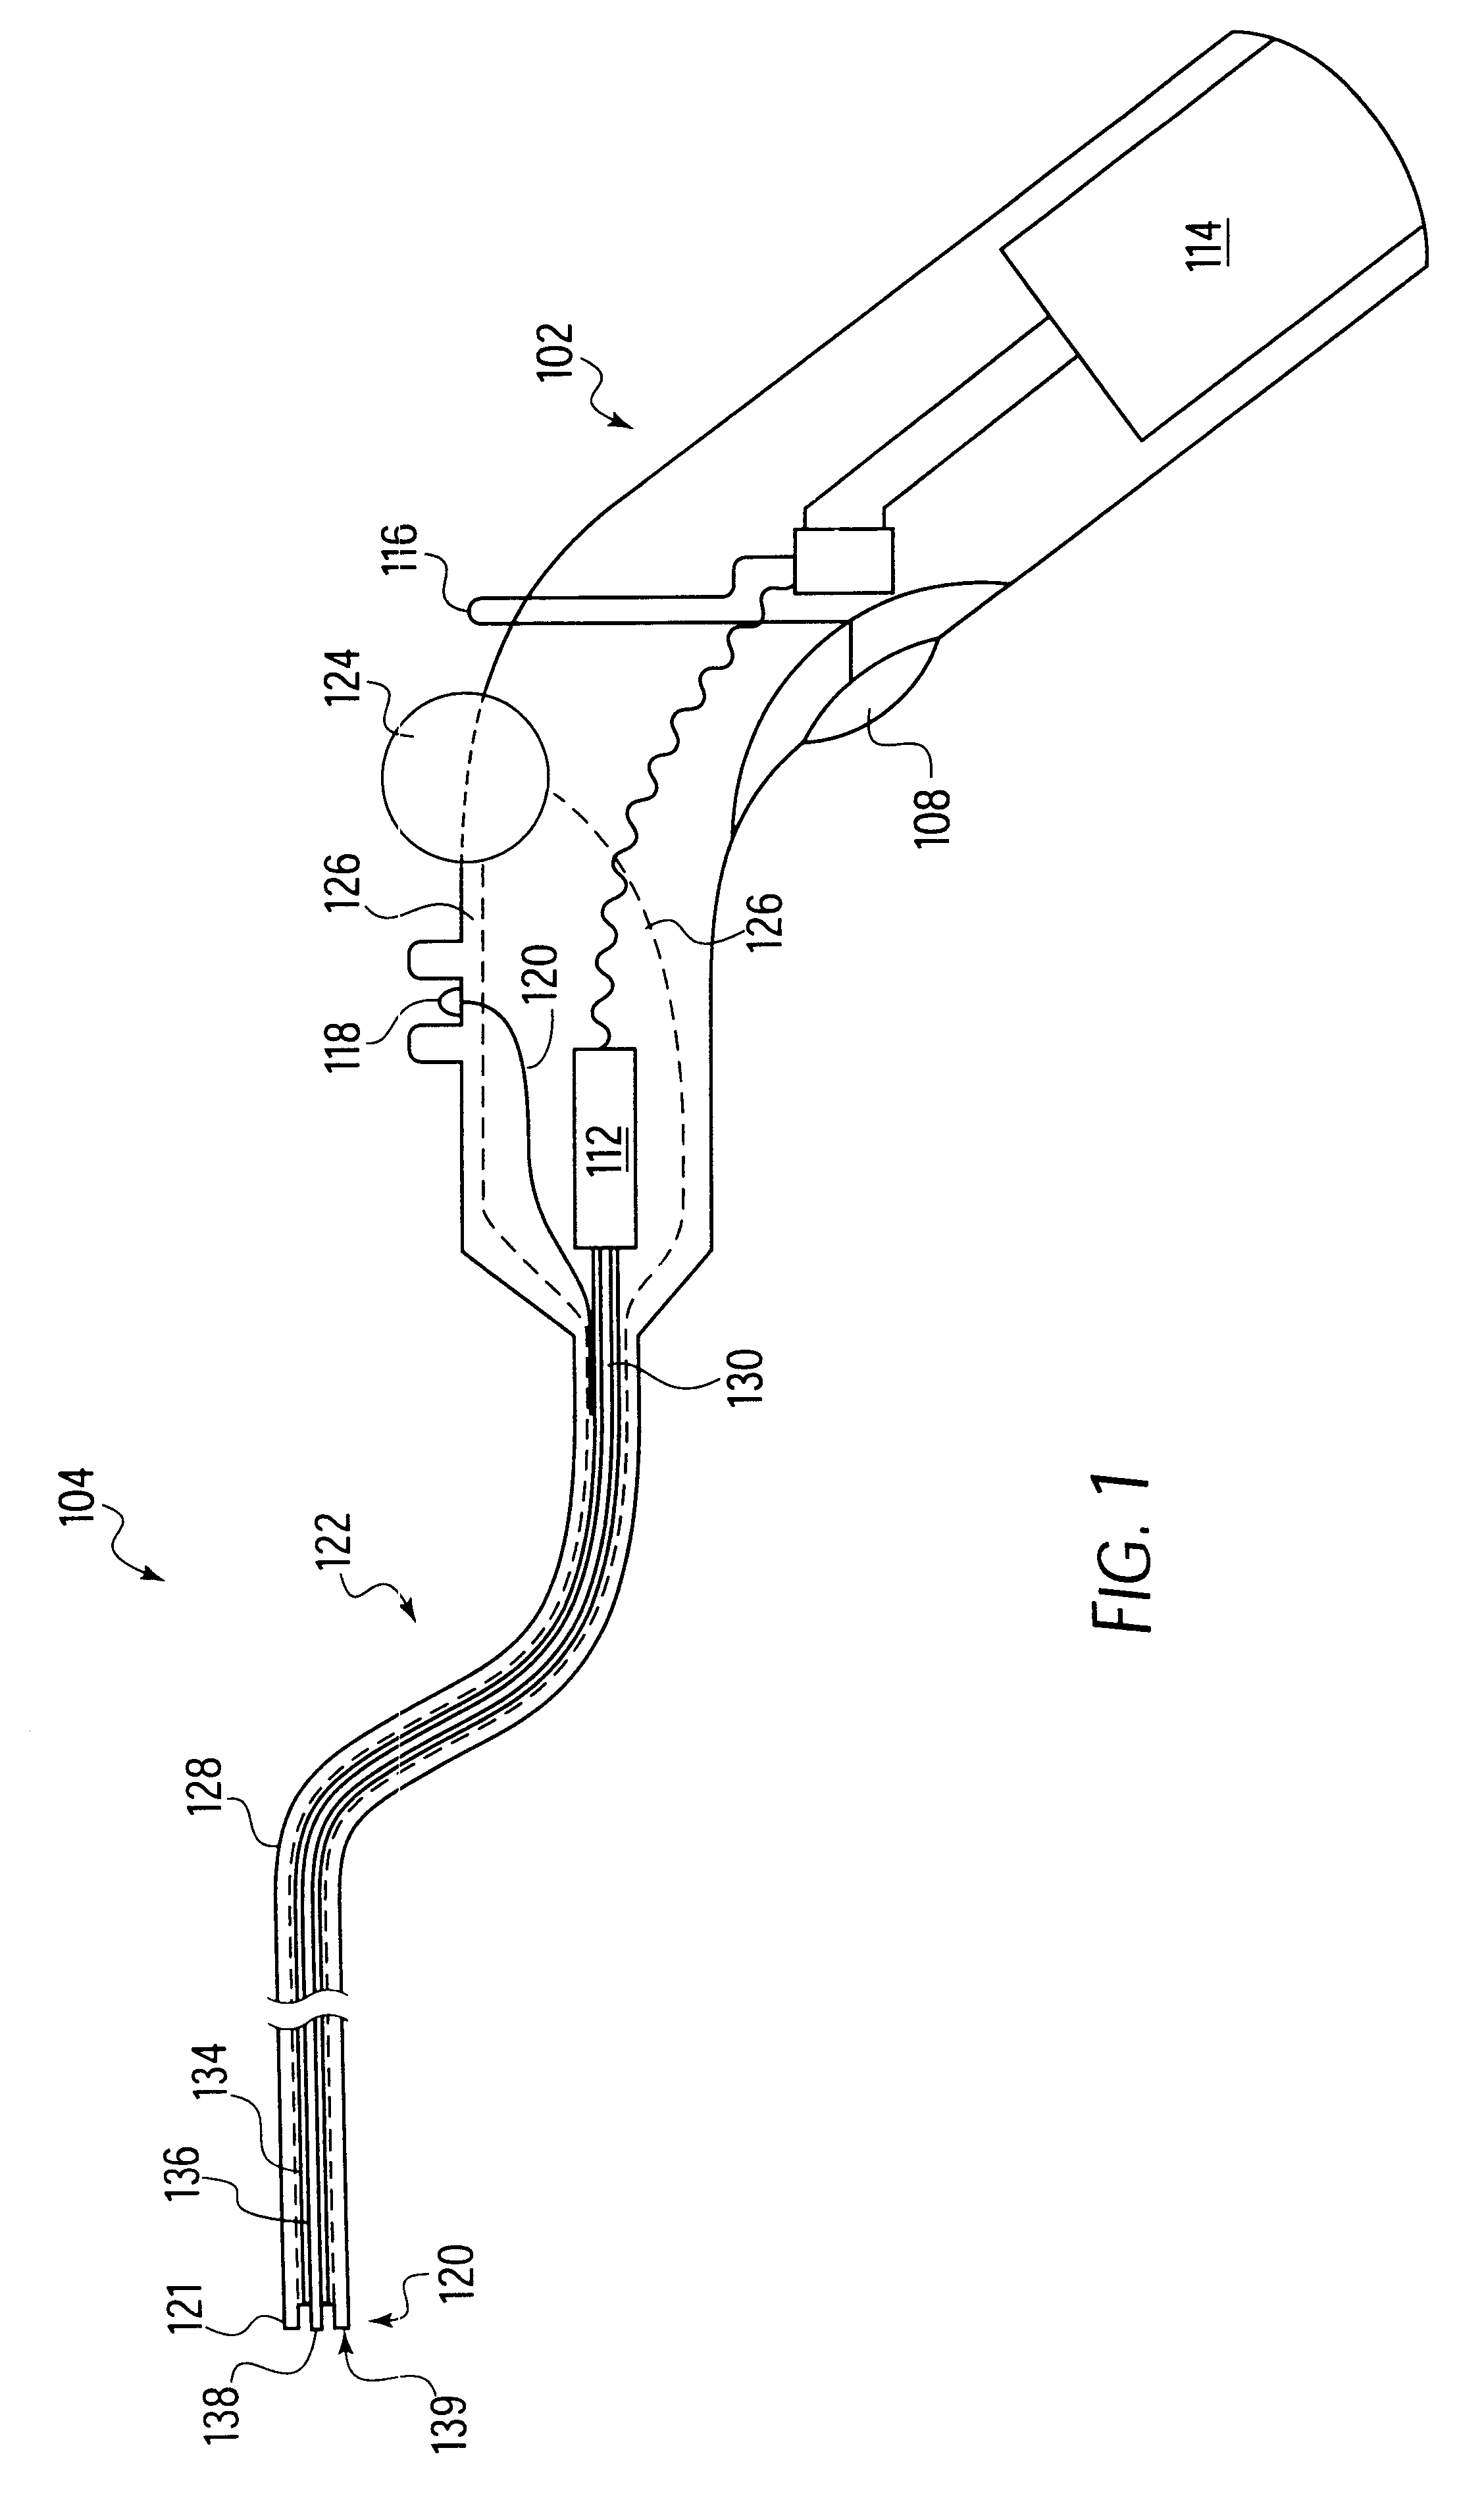 Vessel and lumen expander attachment for use with an electromechanical driver device